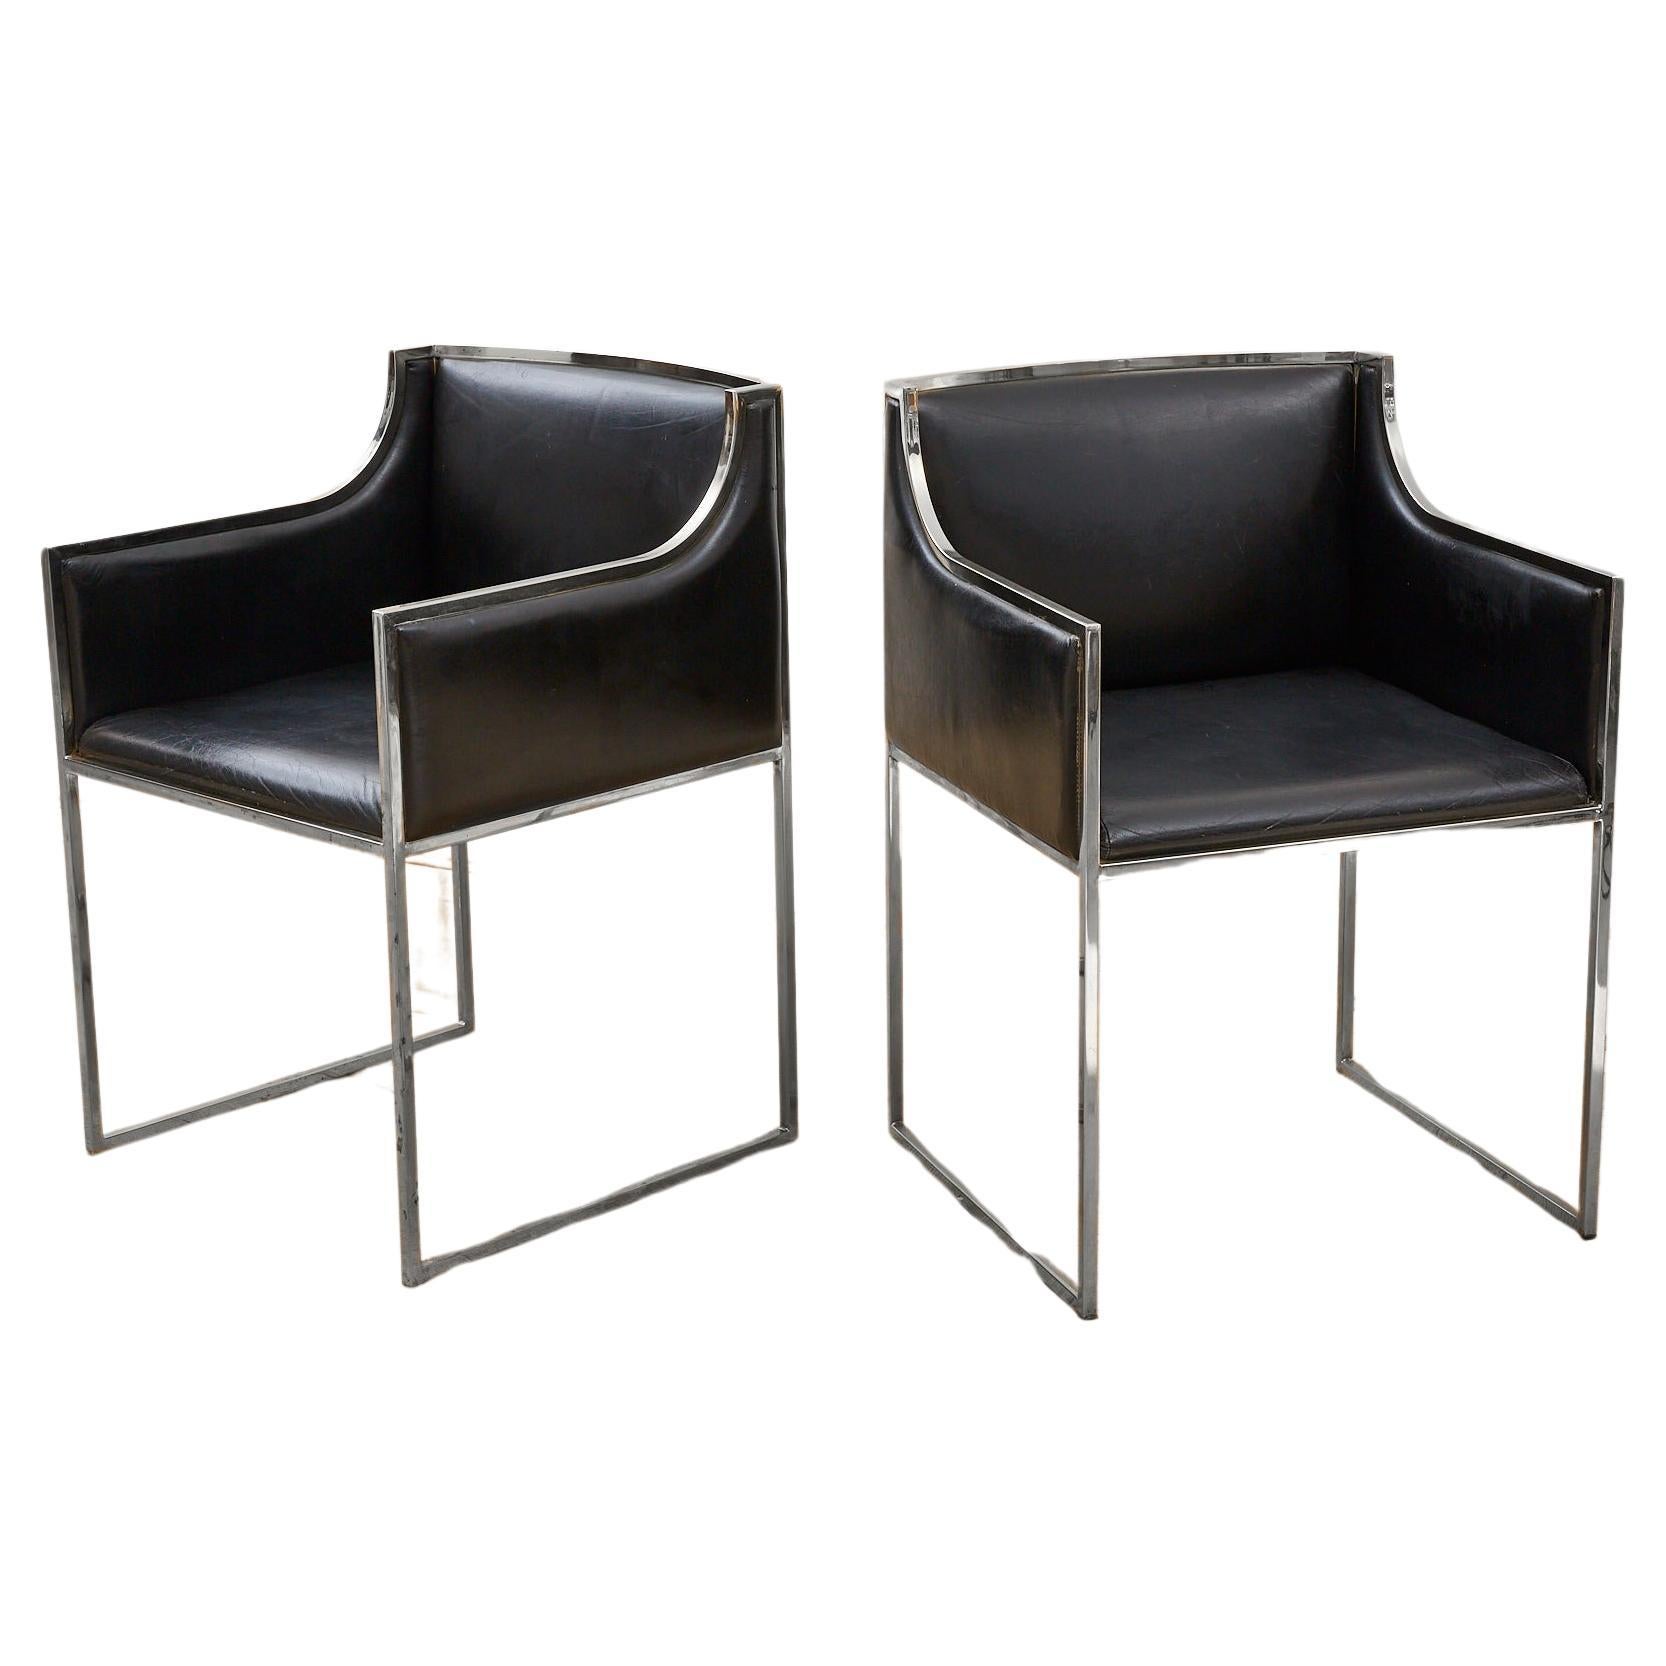 x2 Italian Vintage Chairs, Leather with Chrome, Attributed to Willy Rizzo, 1970s